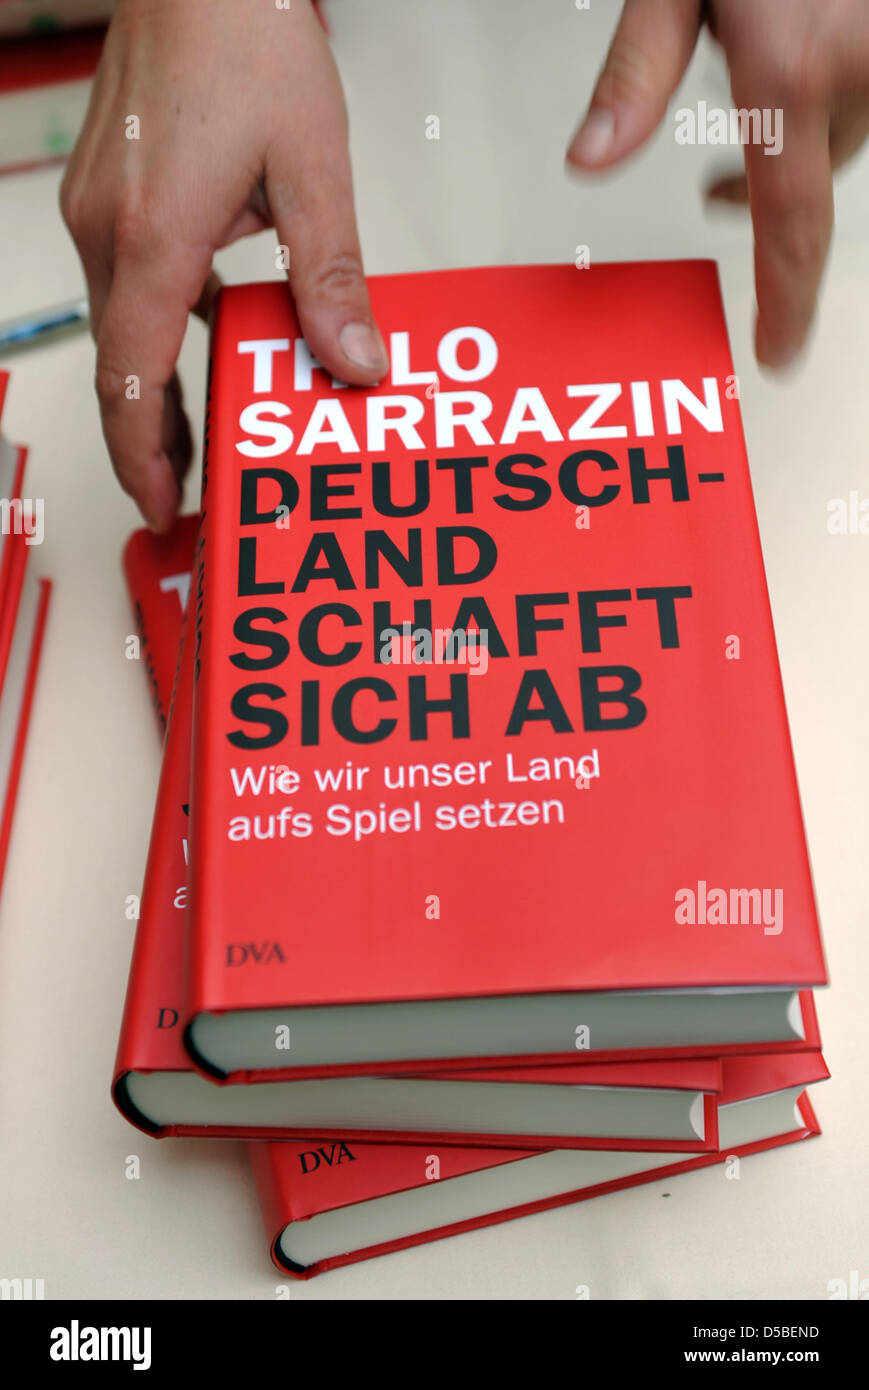 Copies of Thilo Sarrazin's book 'Germany abolishes itself: How we compromise our country' are on display at a press conference in Berlin, Germany, August 2010. The controversial book outlines the author's view that Germans are in danger of becoming 'strangers in their own country' due to muslim immigration. Photo: RAINER JENSEN Stock Photo